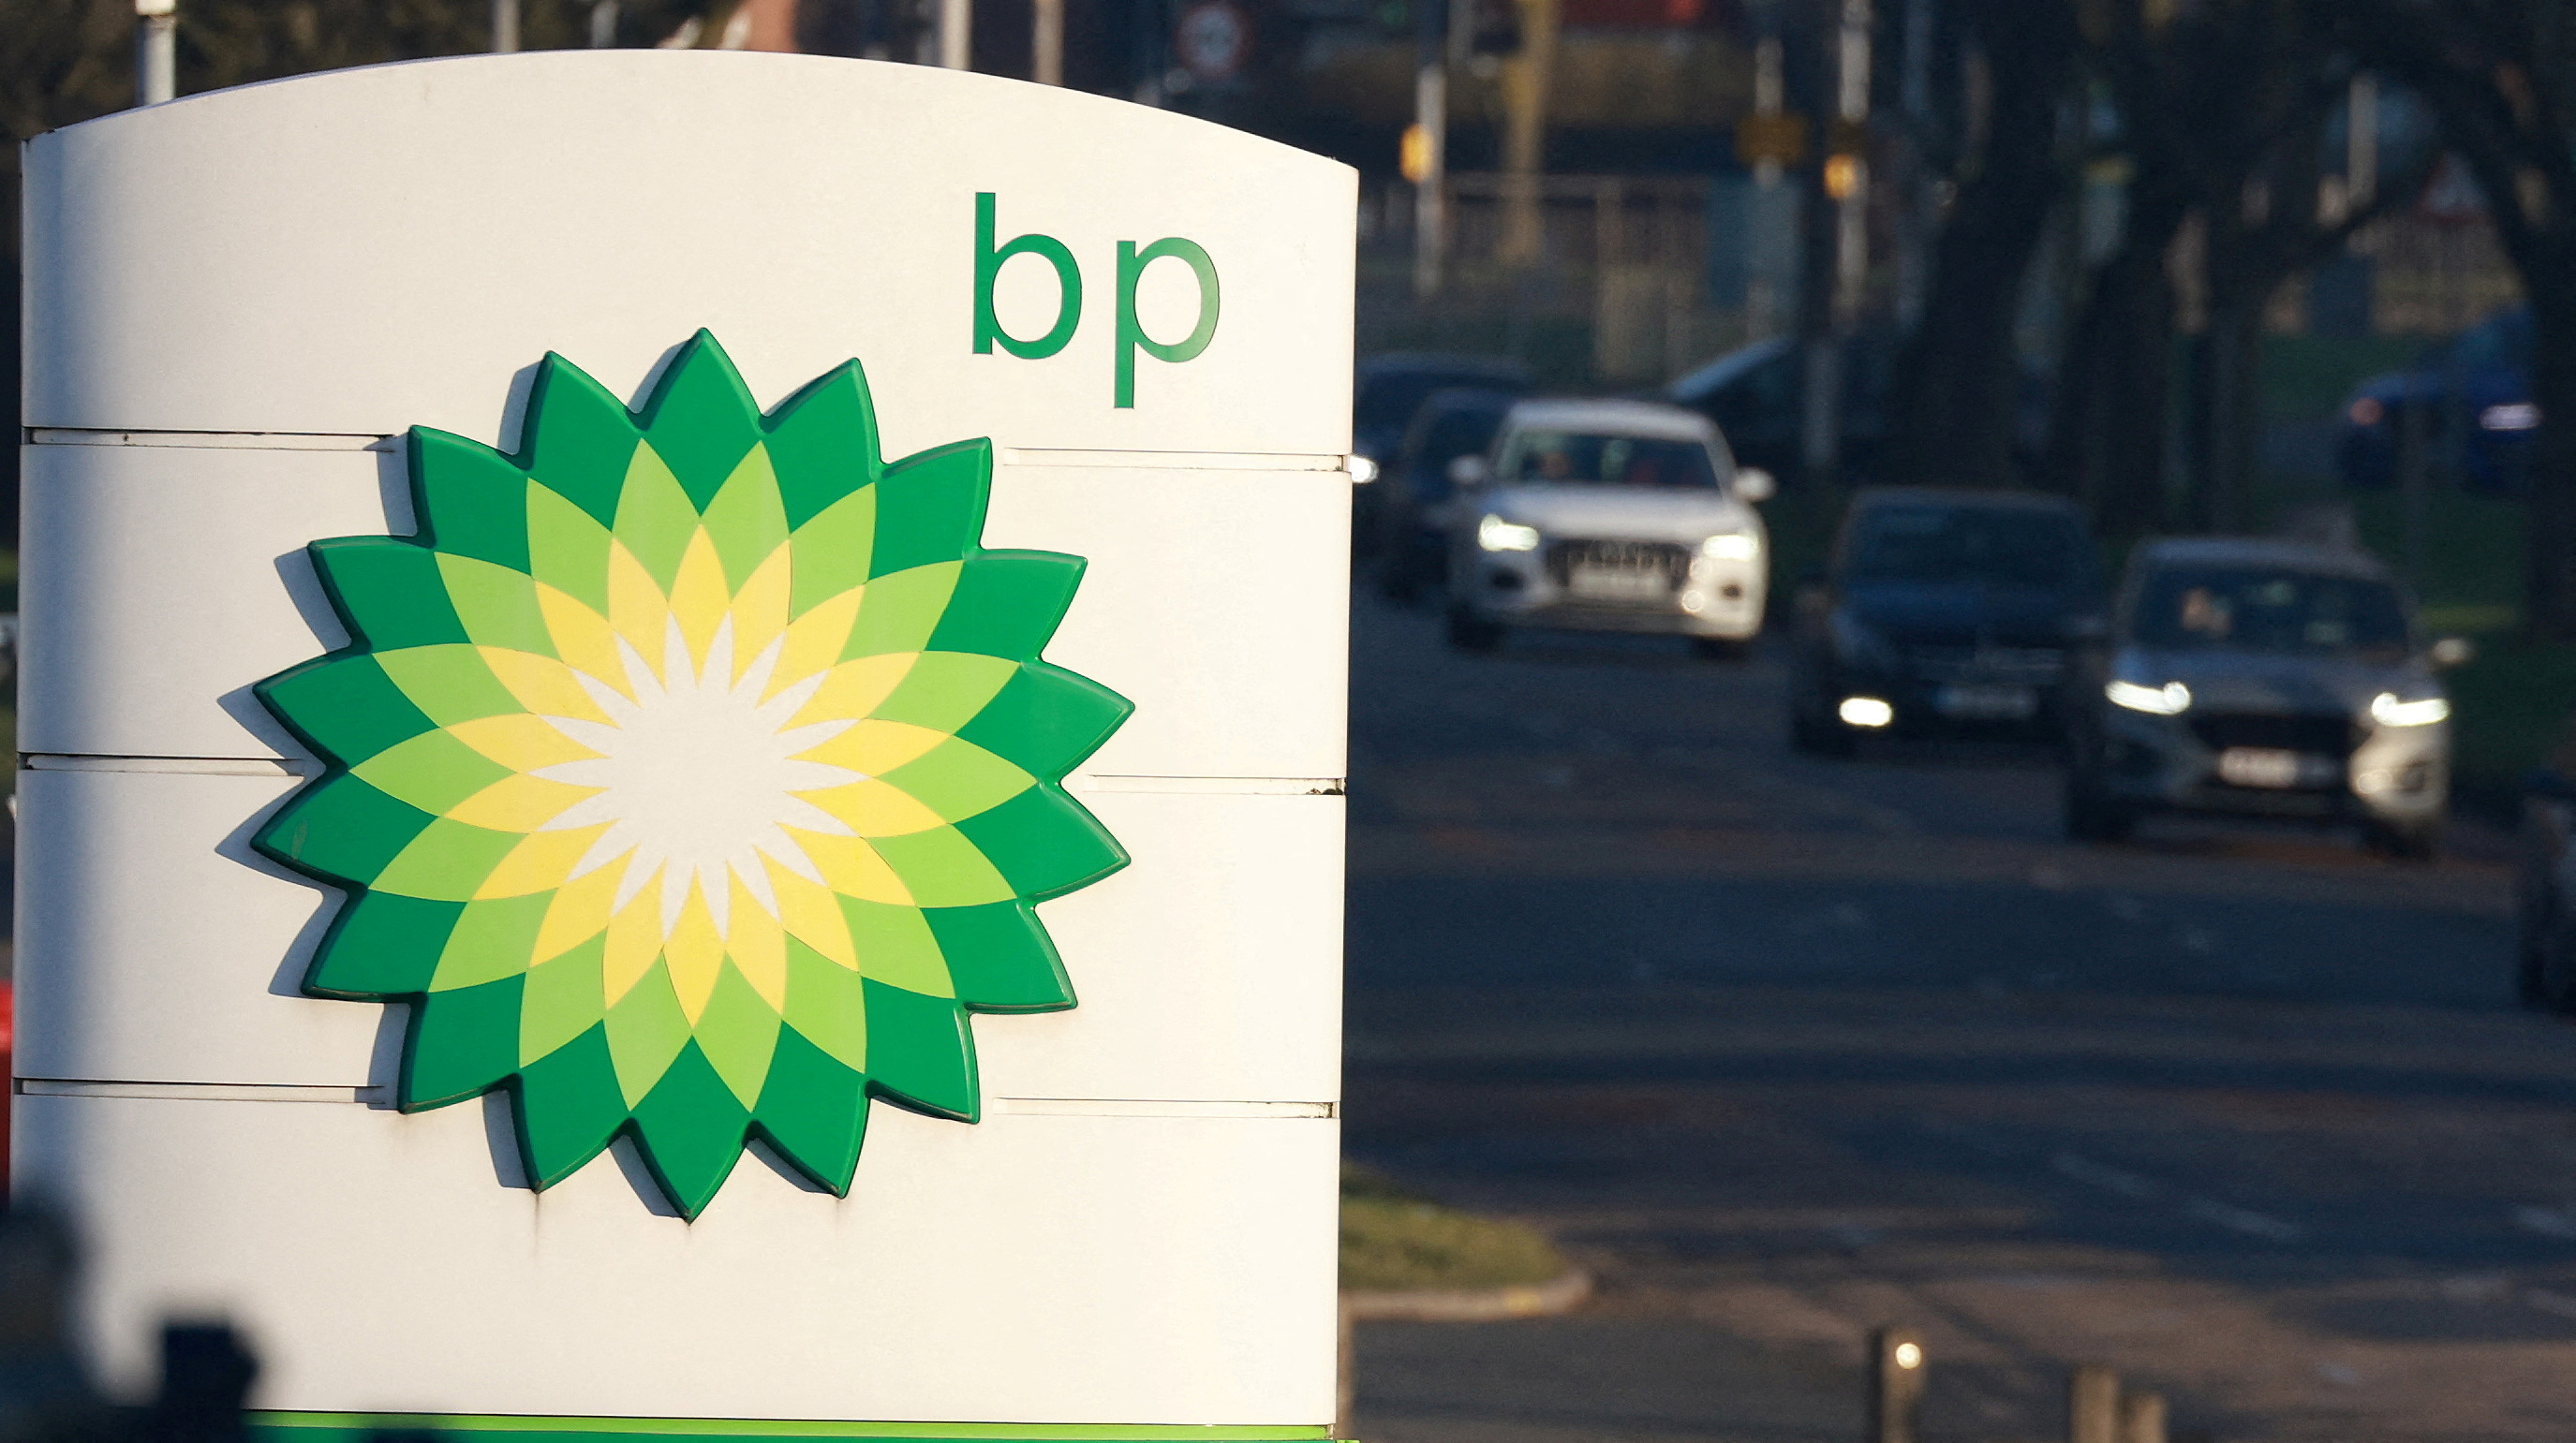 Vehicles drive past a BP (British Petroleum) petrol station in Liverpool